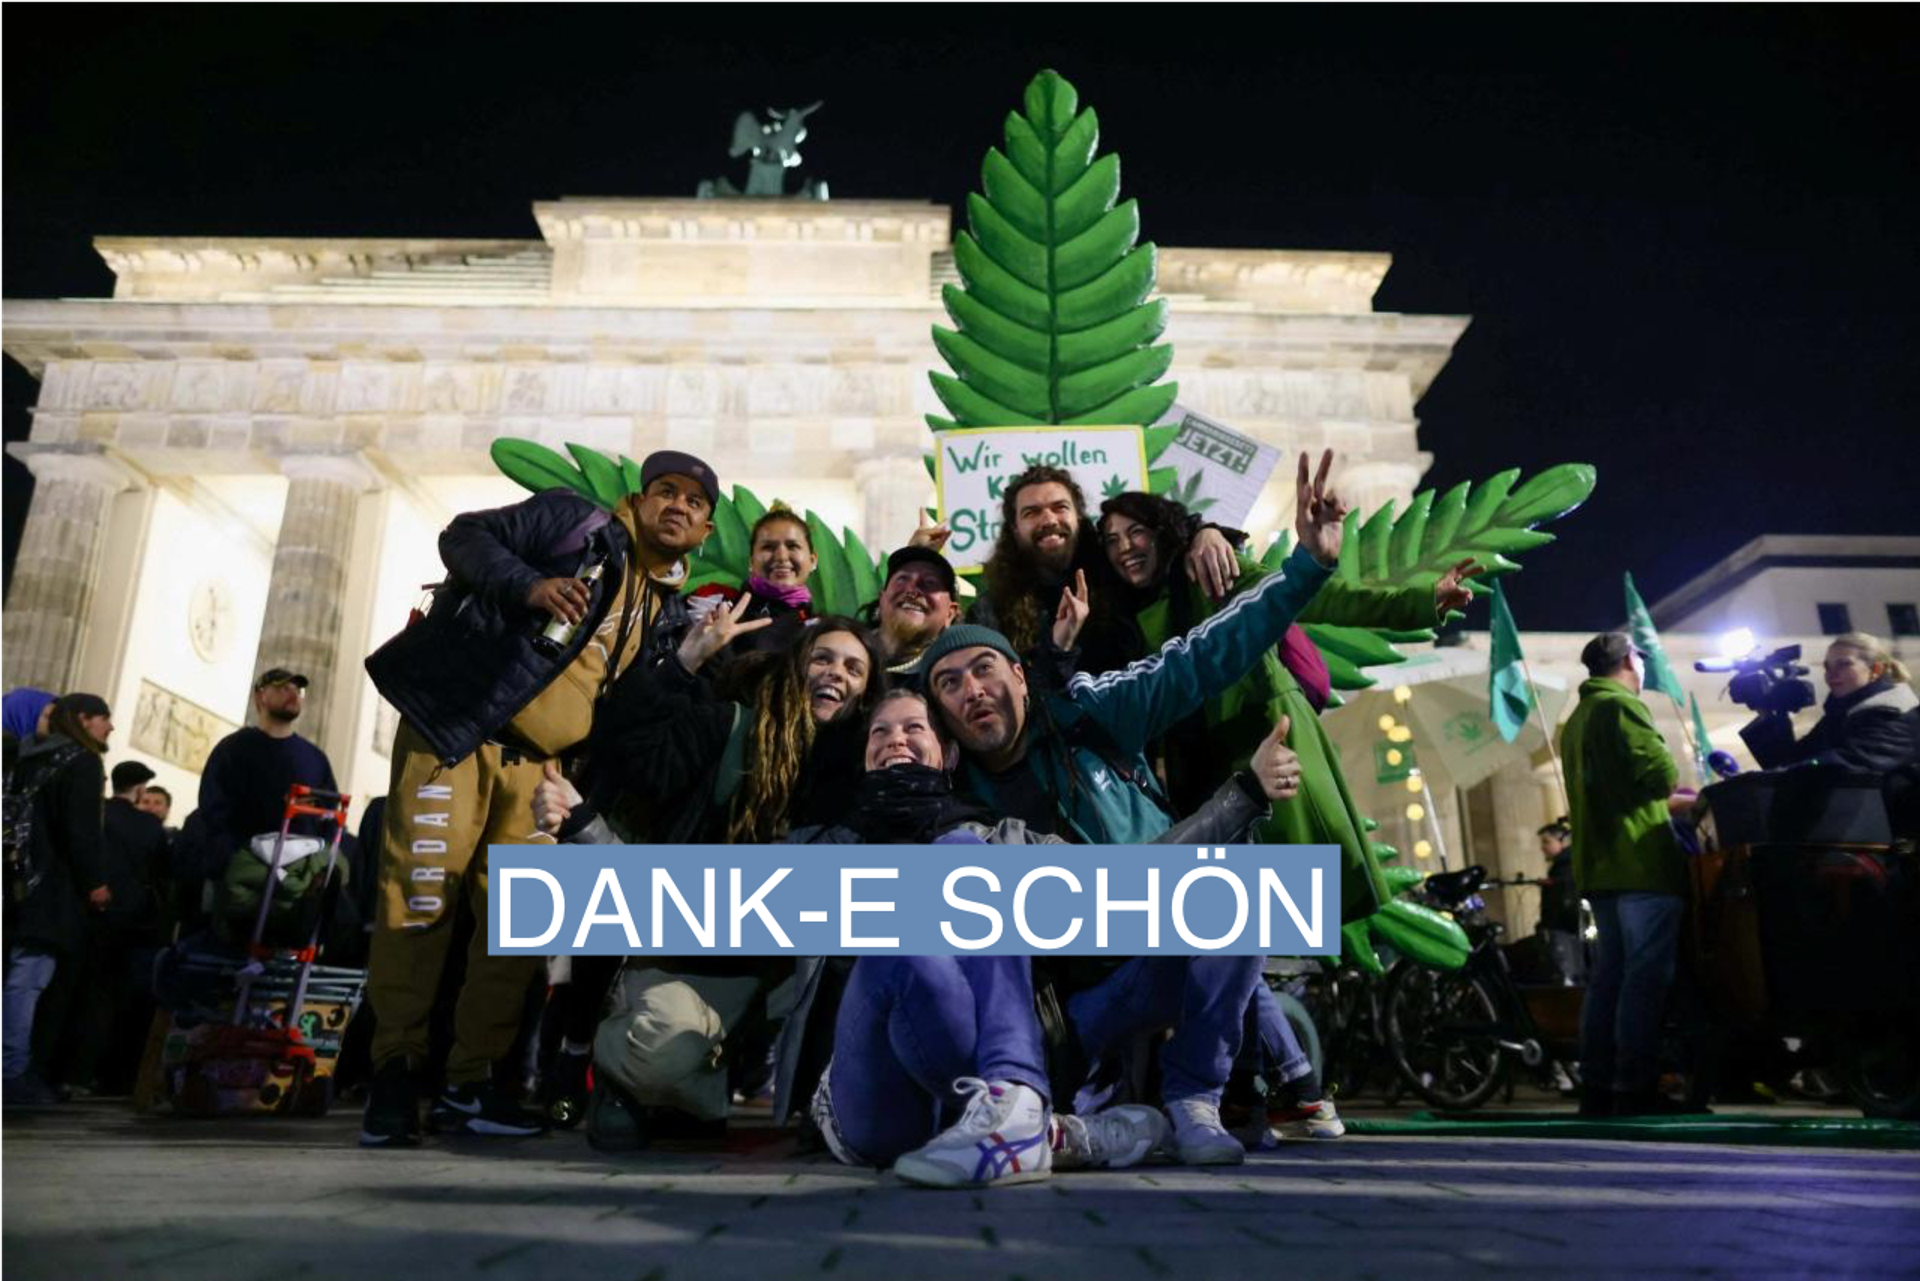 People pose for a picture as Germany's friends of cannabis celebrate the part legalisation of cannabis starting on April 1 with a "smoke in" at Brandenburg Gate in Berlin, Germany,